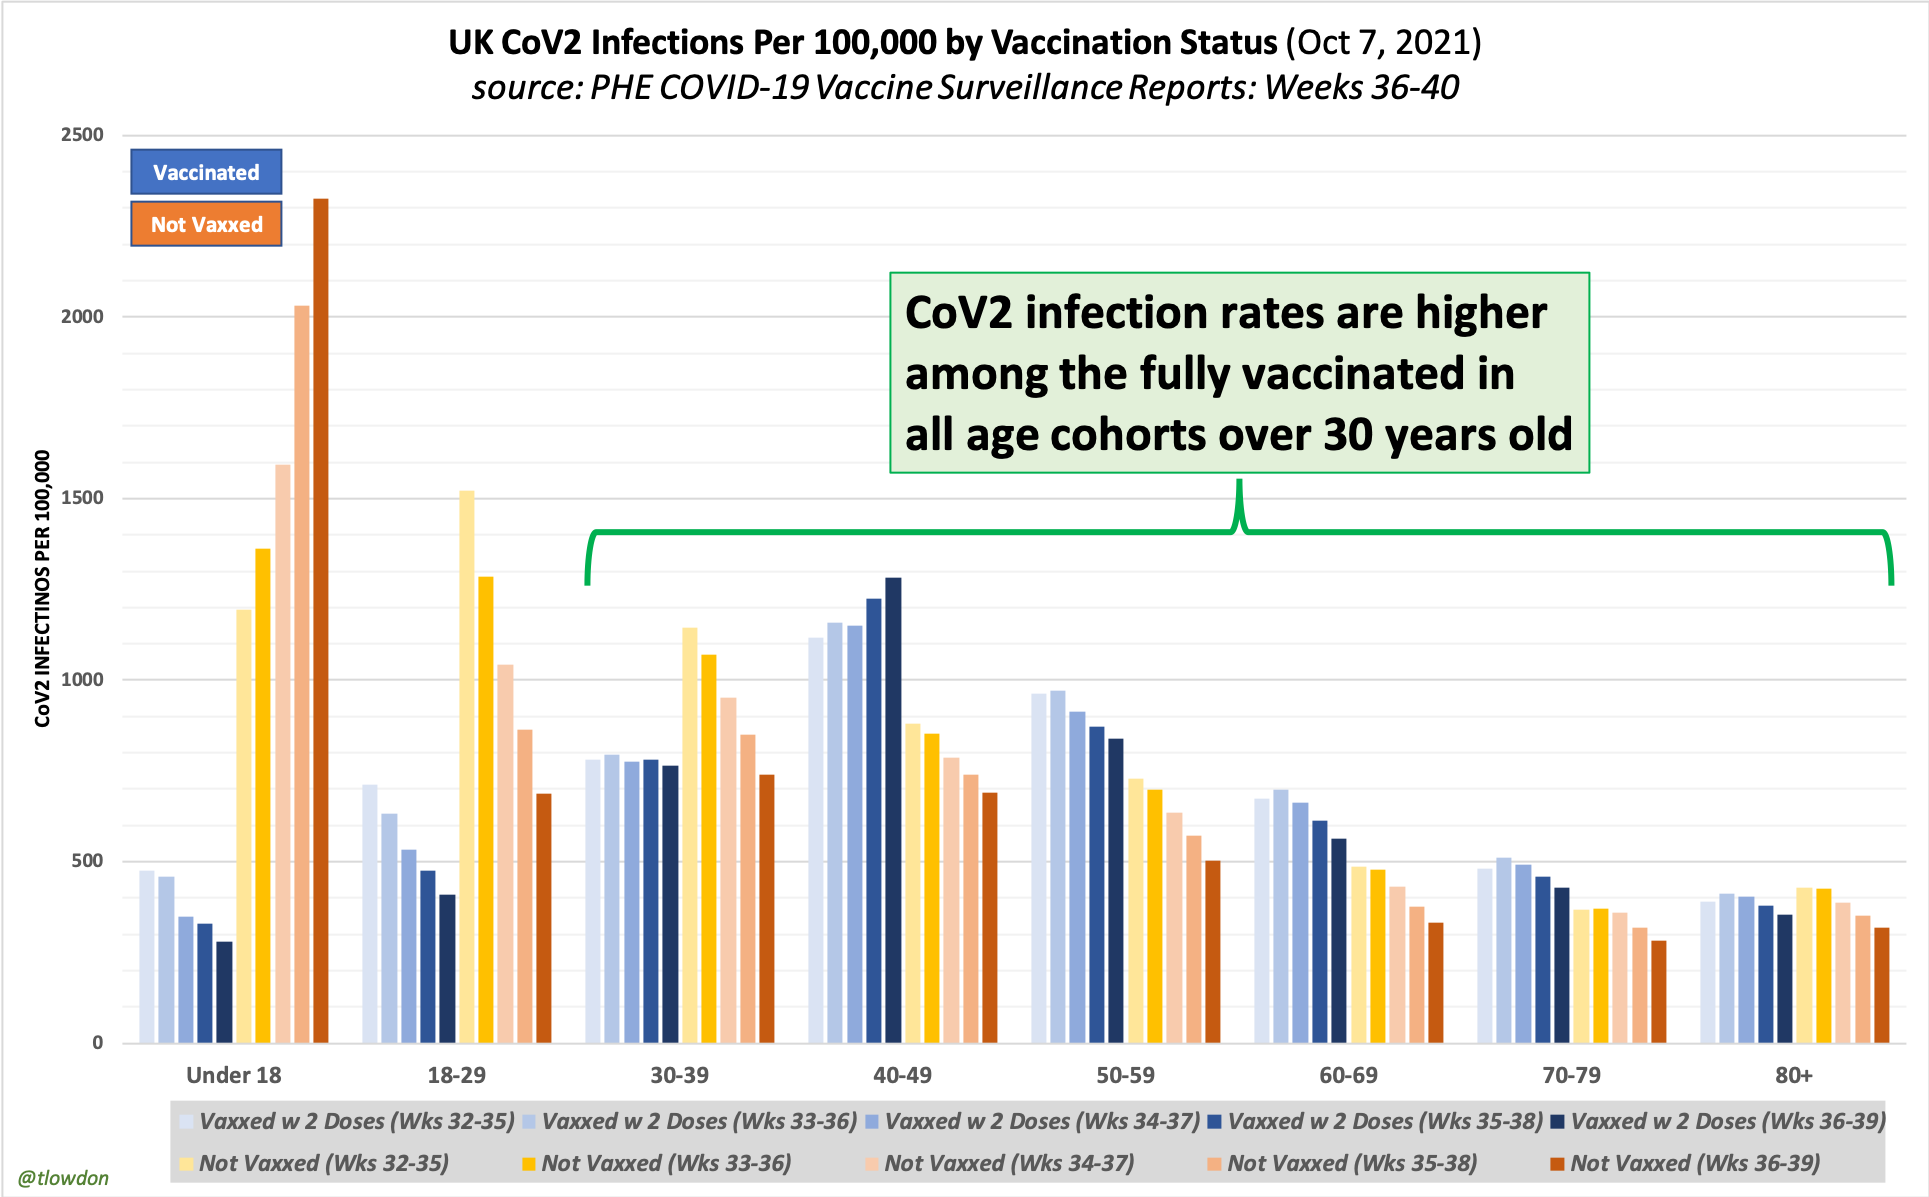 20211007 UK Cov2 Infection Per 100K by Vaccination Status.png